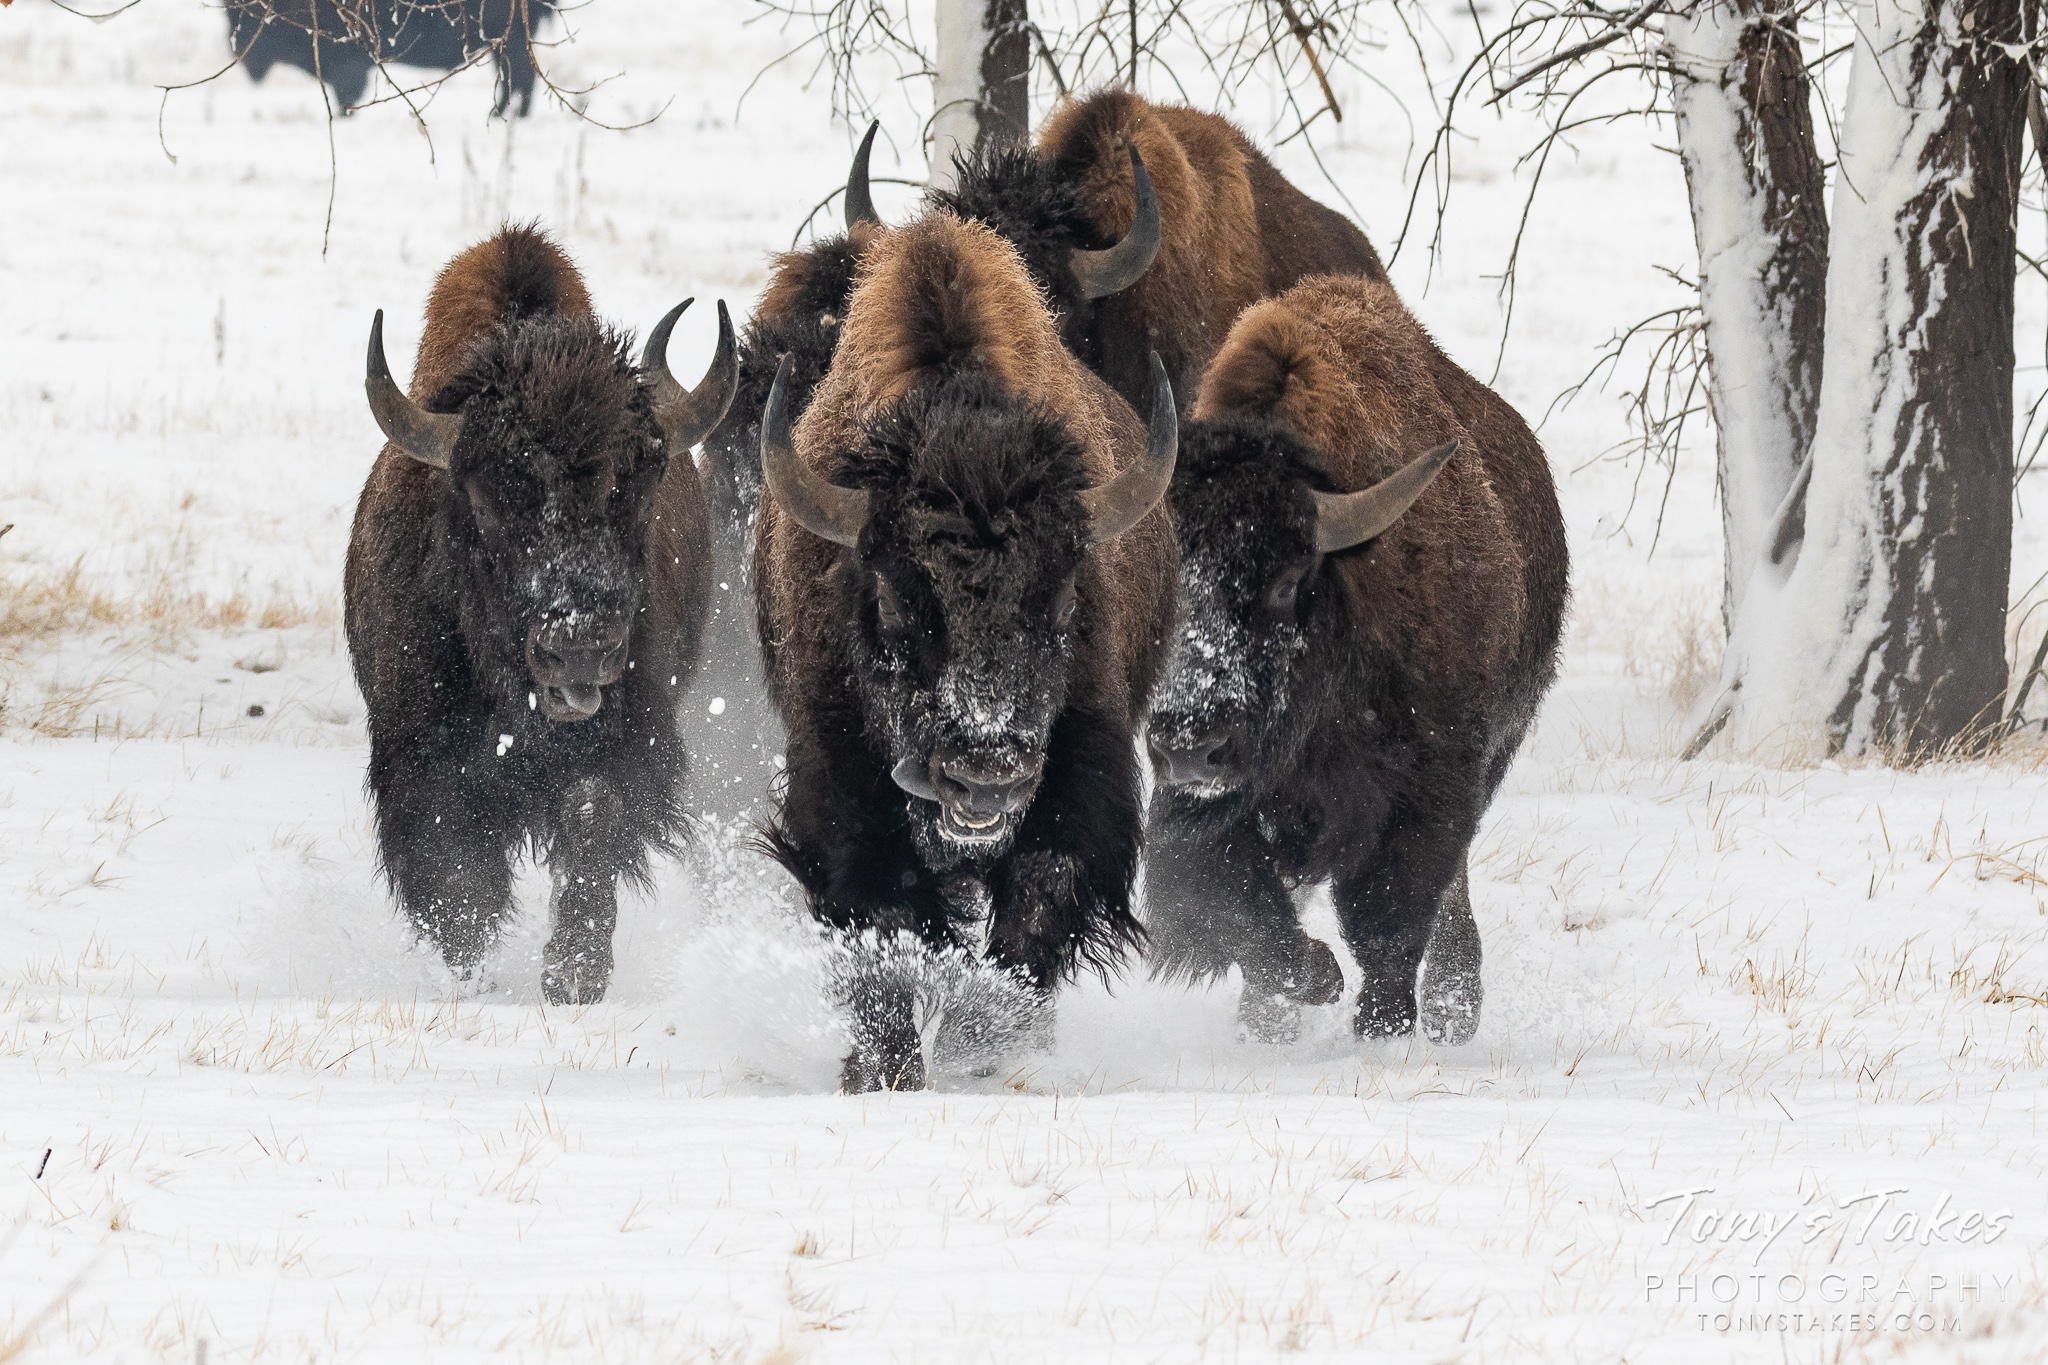 Charge! American bison run headlong through the snow